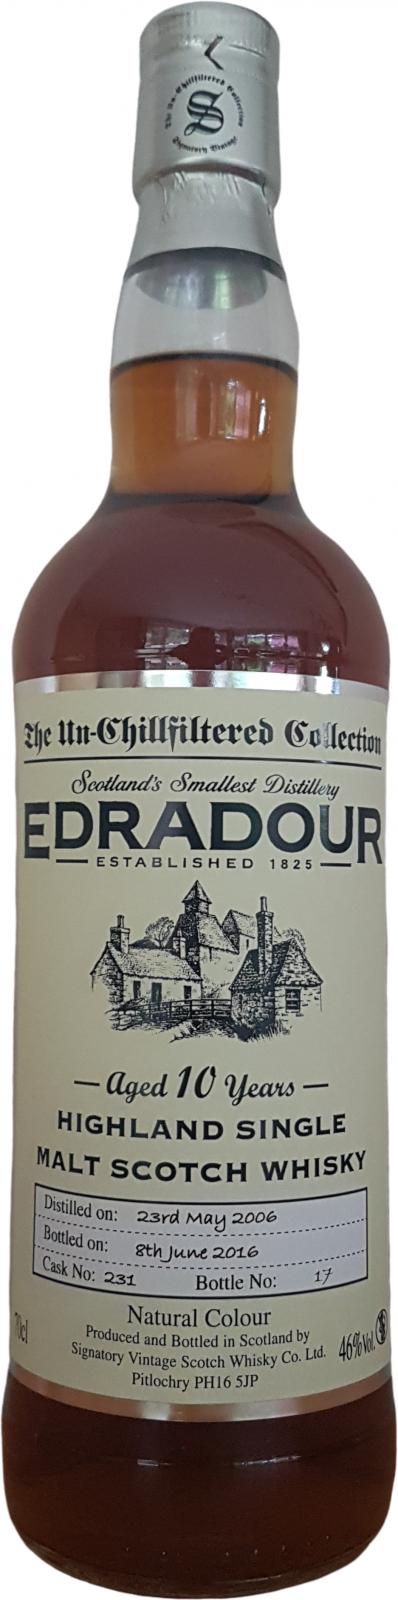 Edradour 2006 SV The Un-Chillfiltered Collection Sherry Butt 231 (part) Specially selected for Denmark 2016 #1 46% 700ml